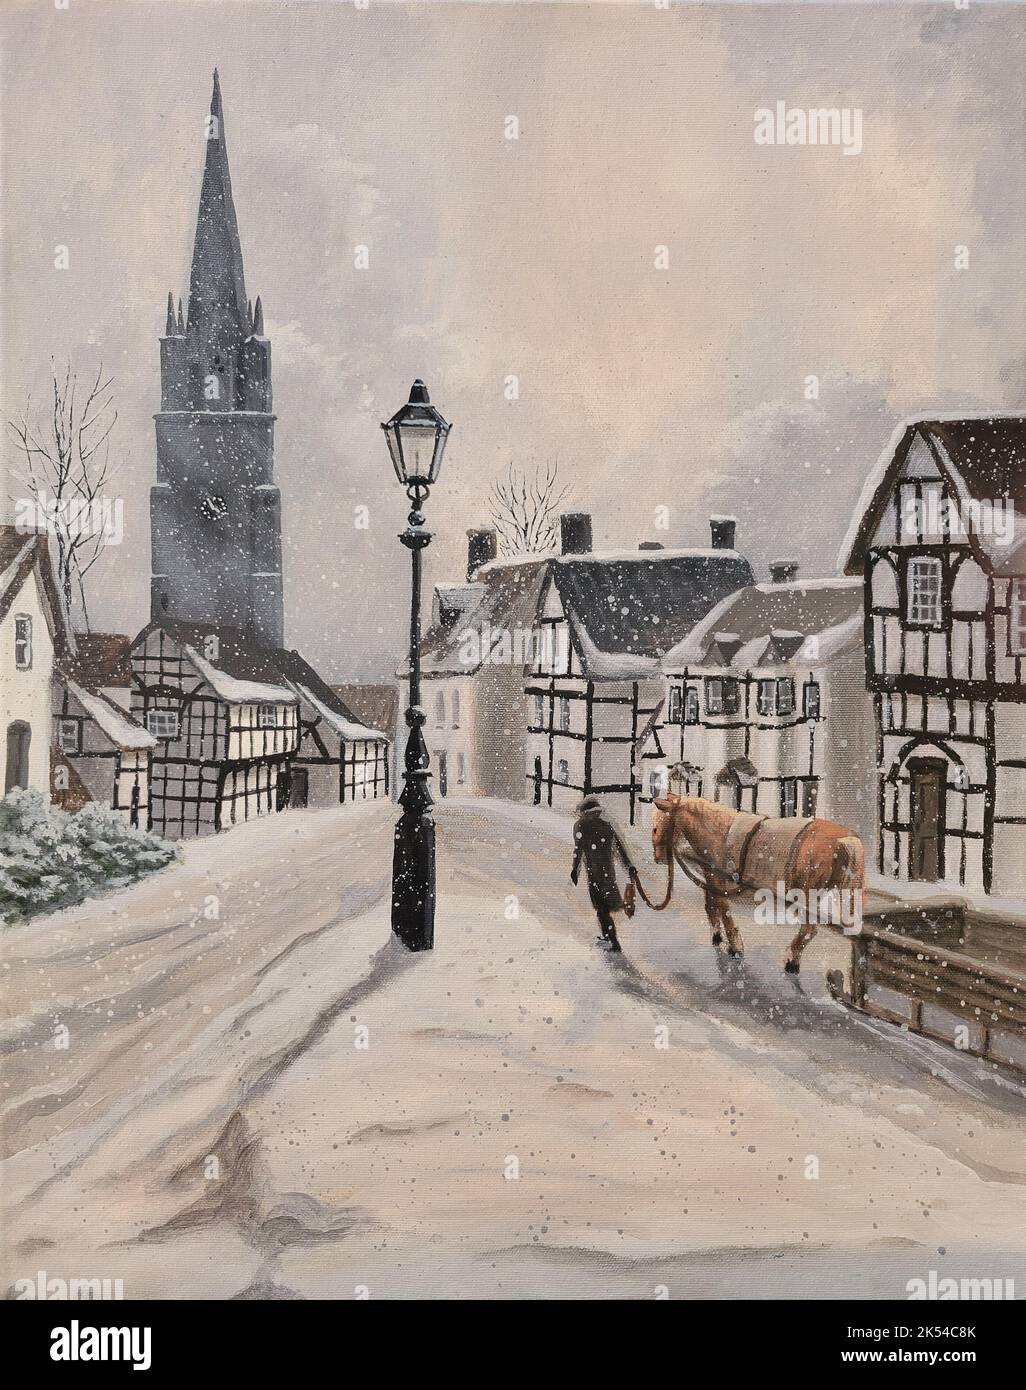 Vintage winter scene in the town of Weobley, England, better known as the 'Black and White Town' because of all the Tudor style buildings. Stock Photo